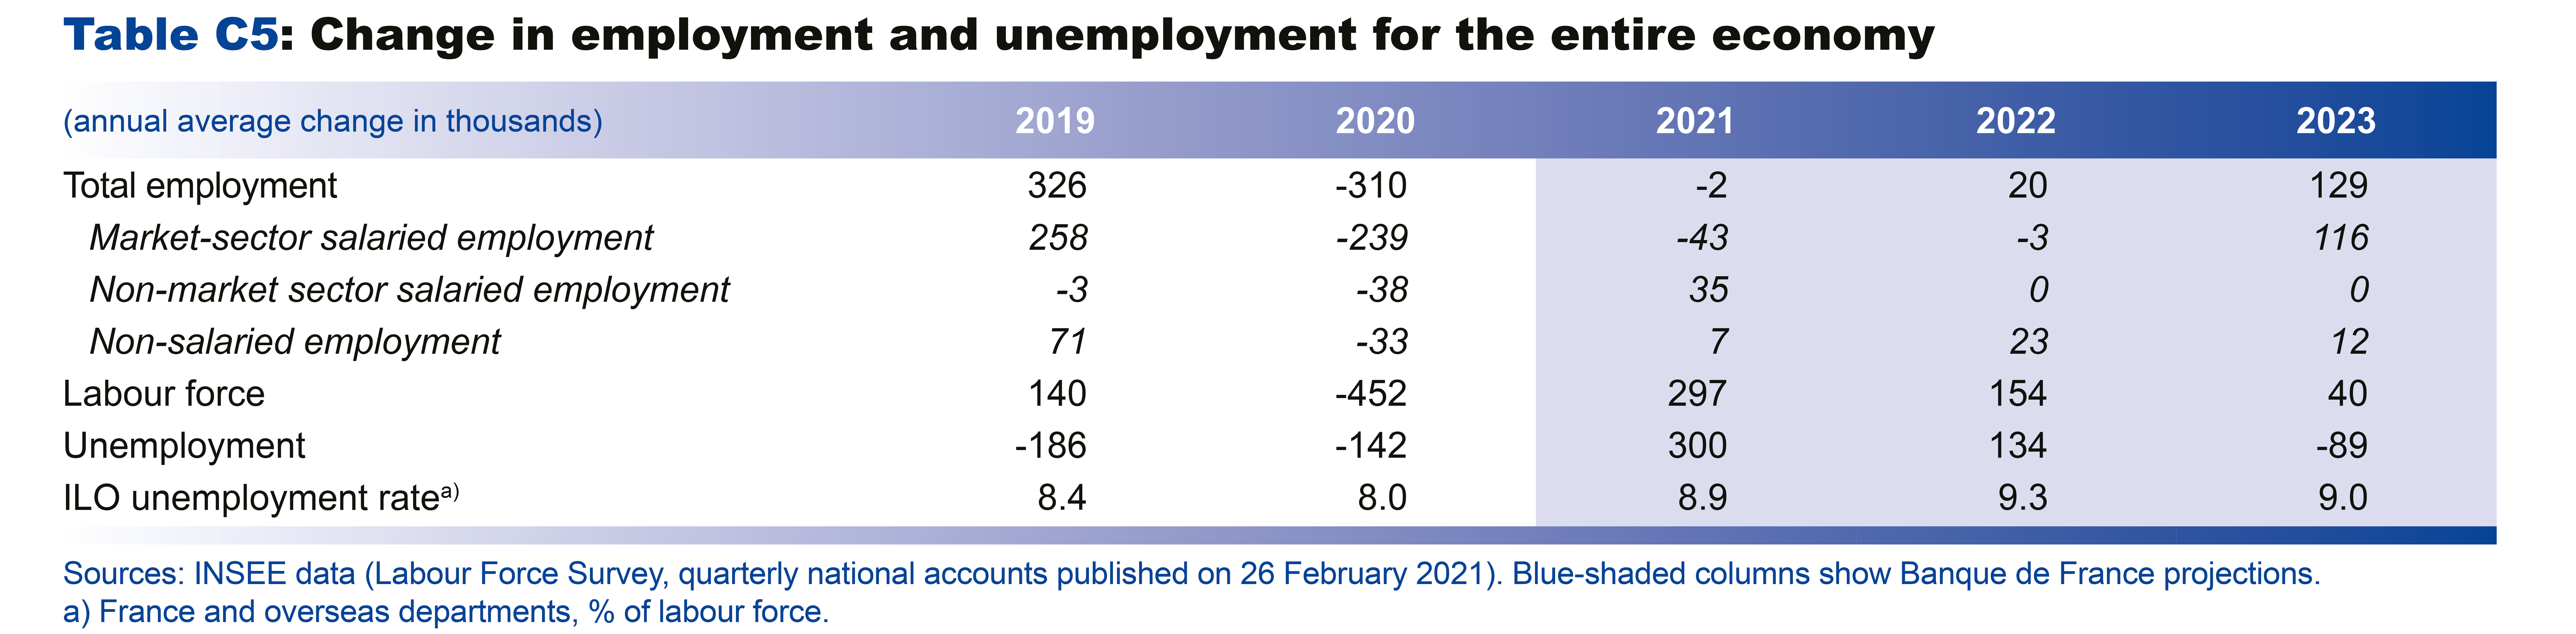 Macroeconomic projections – June 2021 - Change in employment and unemployment for the entire economy